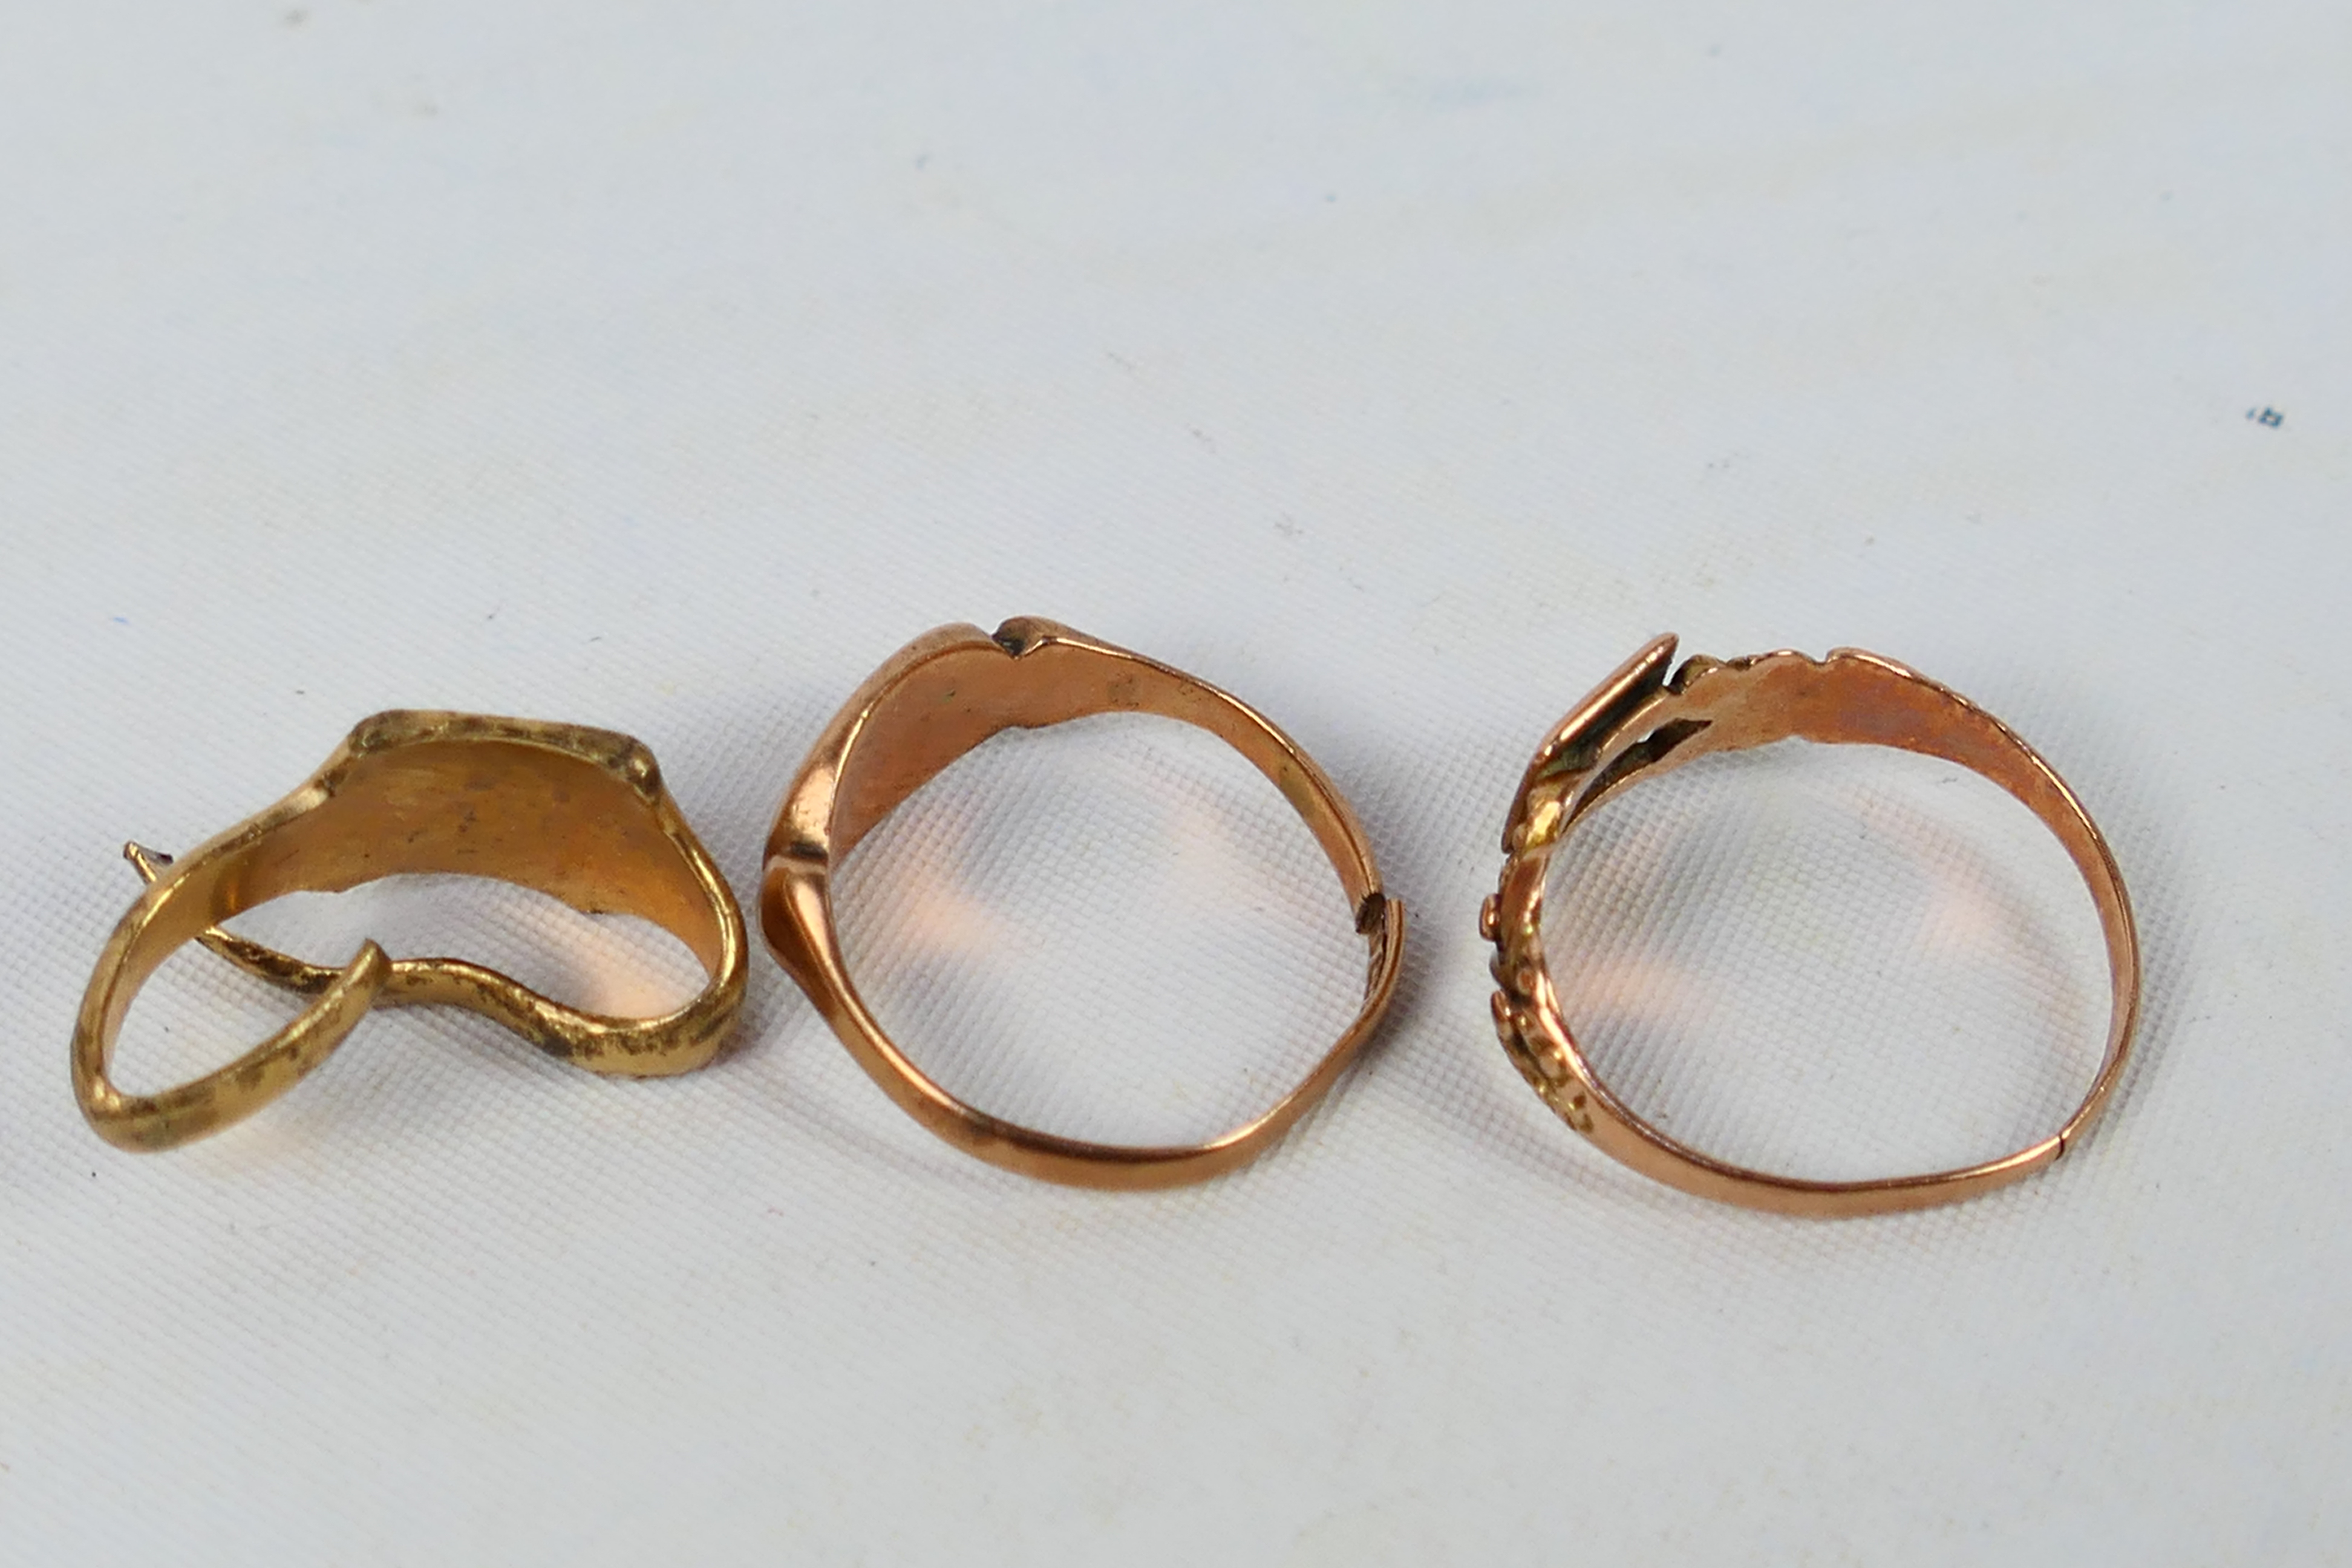 9ct Gold - Three 9ct gold rings, all with cut shanks, approximately 6.2 grams. - Image 5 of 5